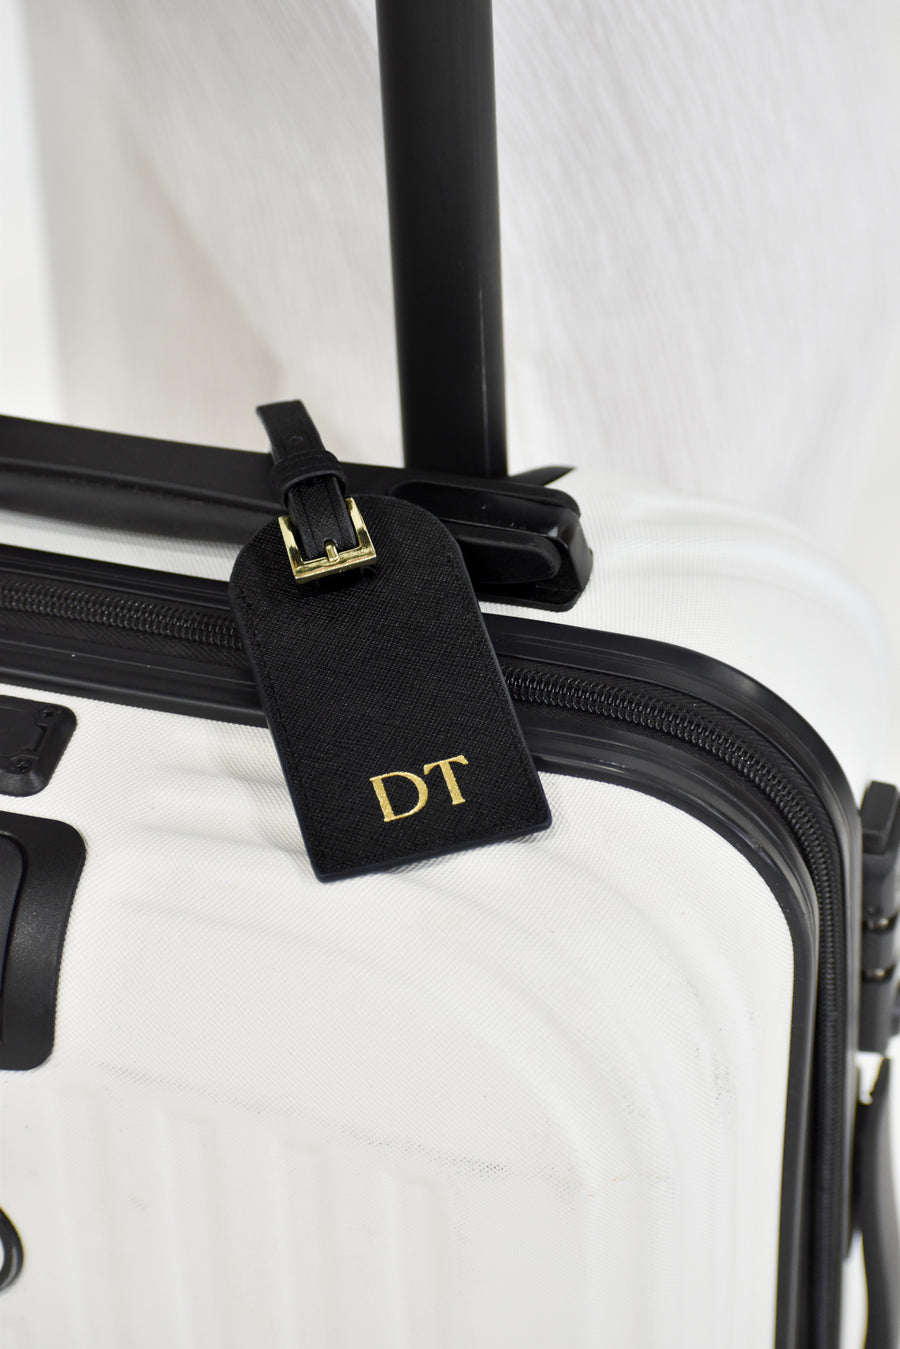 Personalised Leather Luggage Tag - Black with Gold Hardware